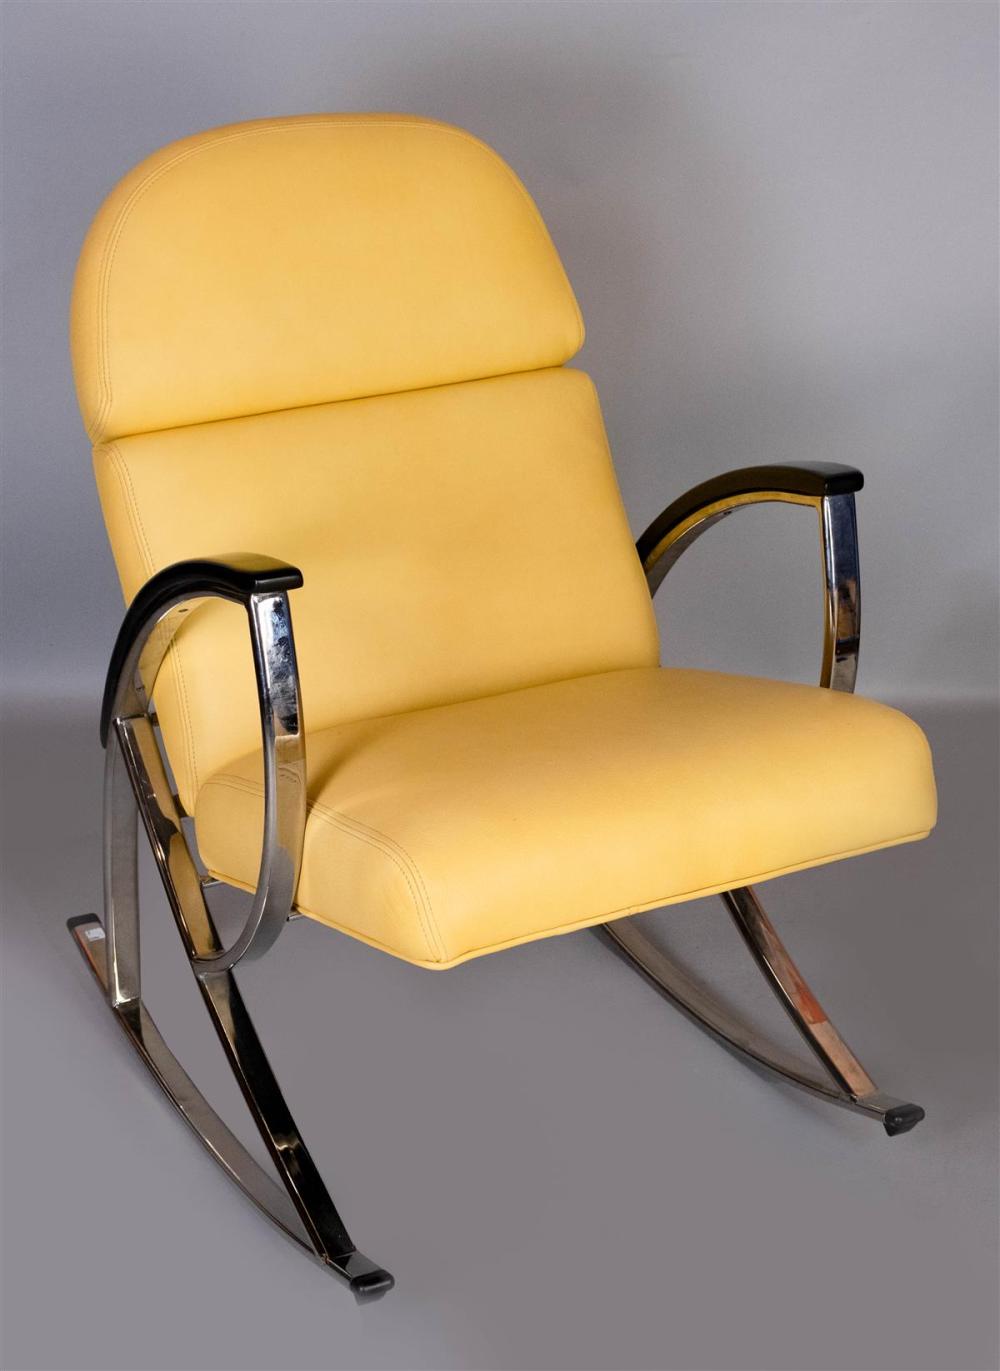 UNUSUAL MODERNIST YELLOW LEATHER